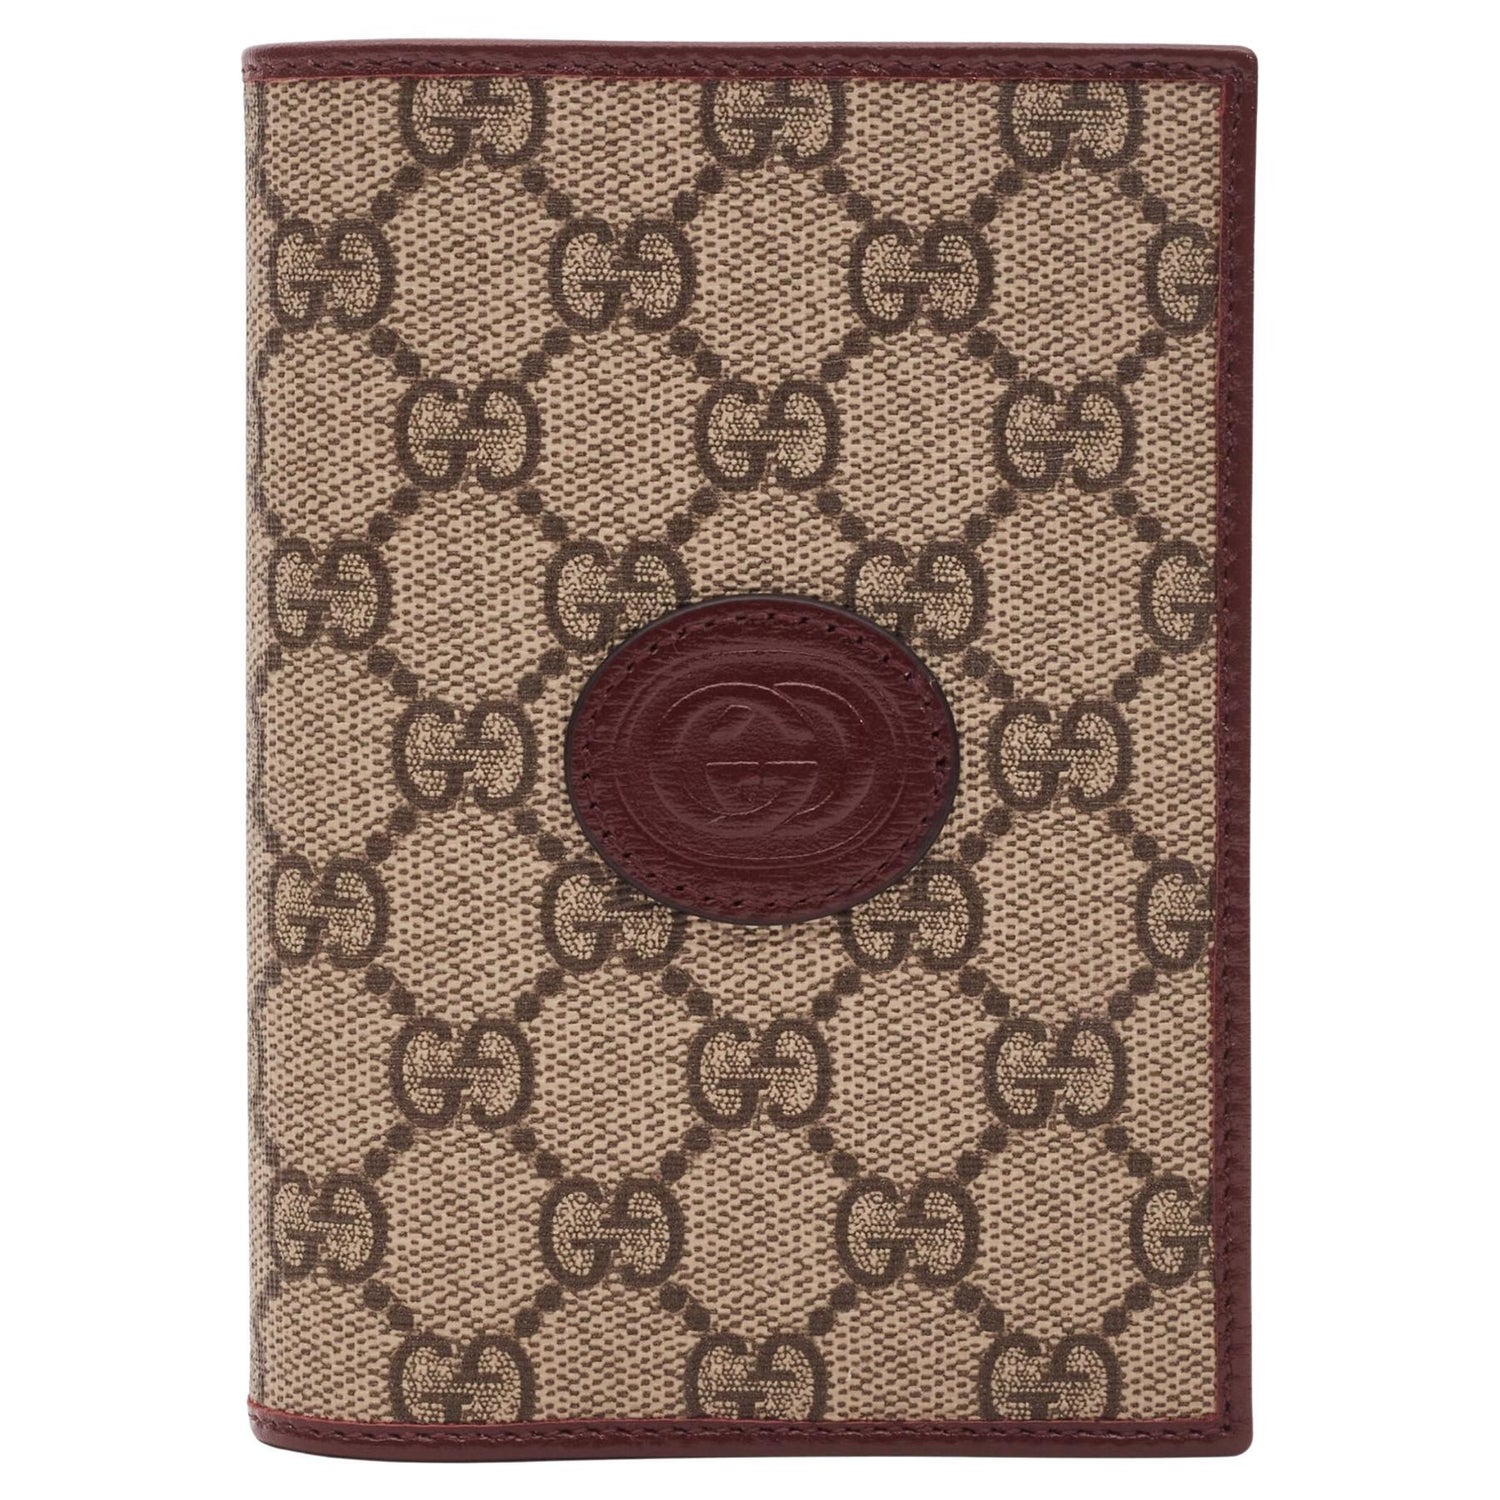 Passport Case - 11 For Sale on 1stDibs  chanel passport holder, gucci  passport holder, chanel passport cover